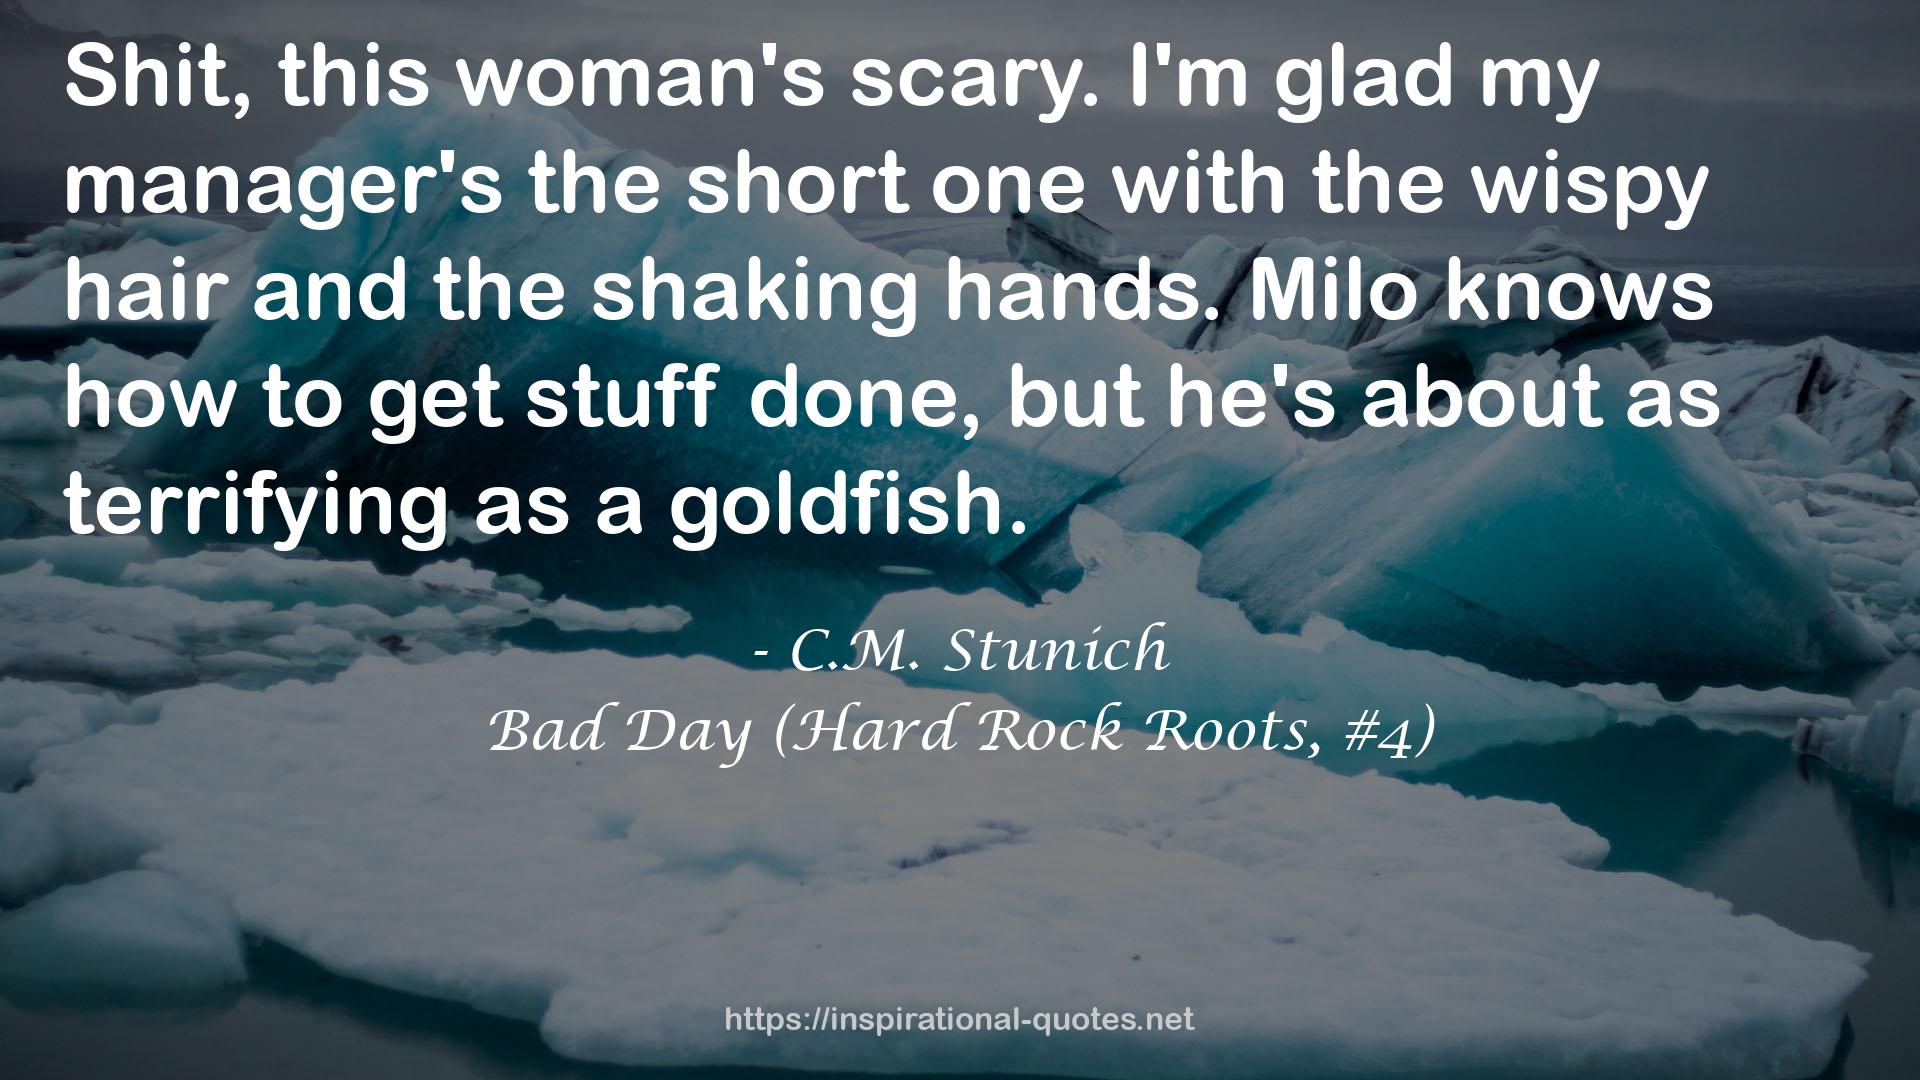 Bad Day (Hard Rock Roots, #4) QUOTES